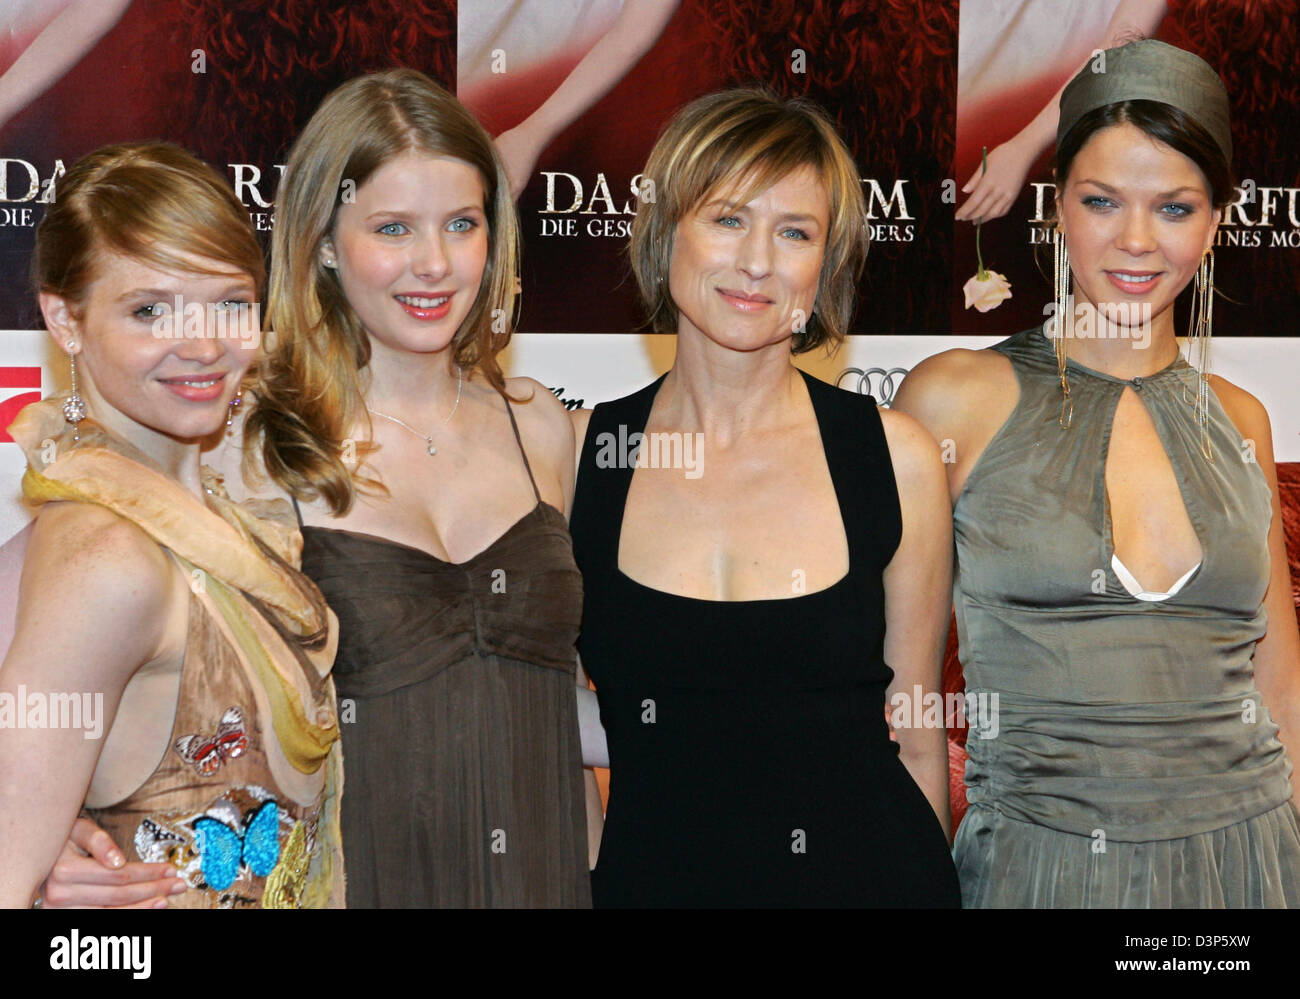 Actresses (L-R) Karoline Herfurth, Rachel Hurd-Wood, Corinna Harfouch und Jessica Schwarz stand together prior to the Berlin premiere of the film 'Perfume' at the 'Cinestar' cinema in Berlin, Friday, 8 September 2006. The film will be shown at German cinemas from 14 September onwards. Photo: Soeren Stache Stock Photo